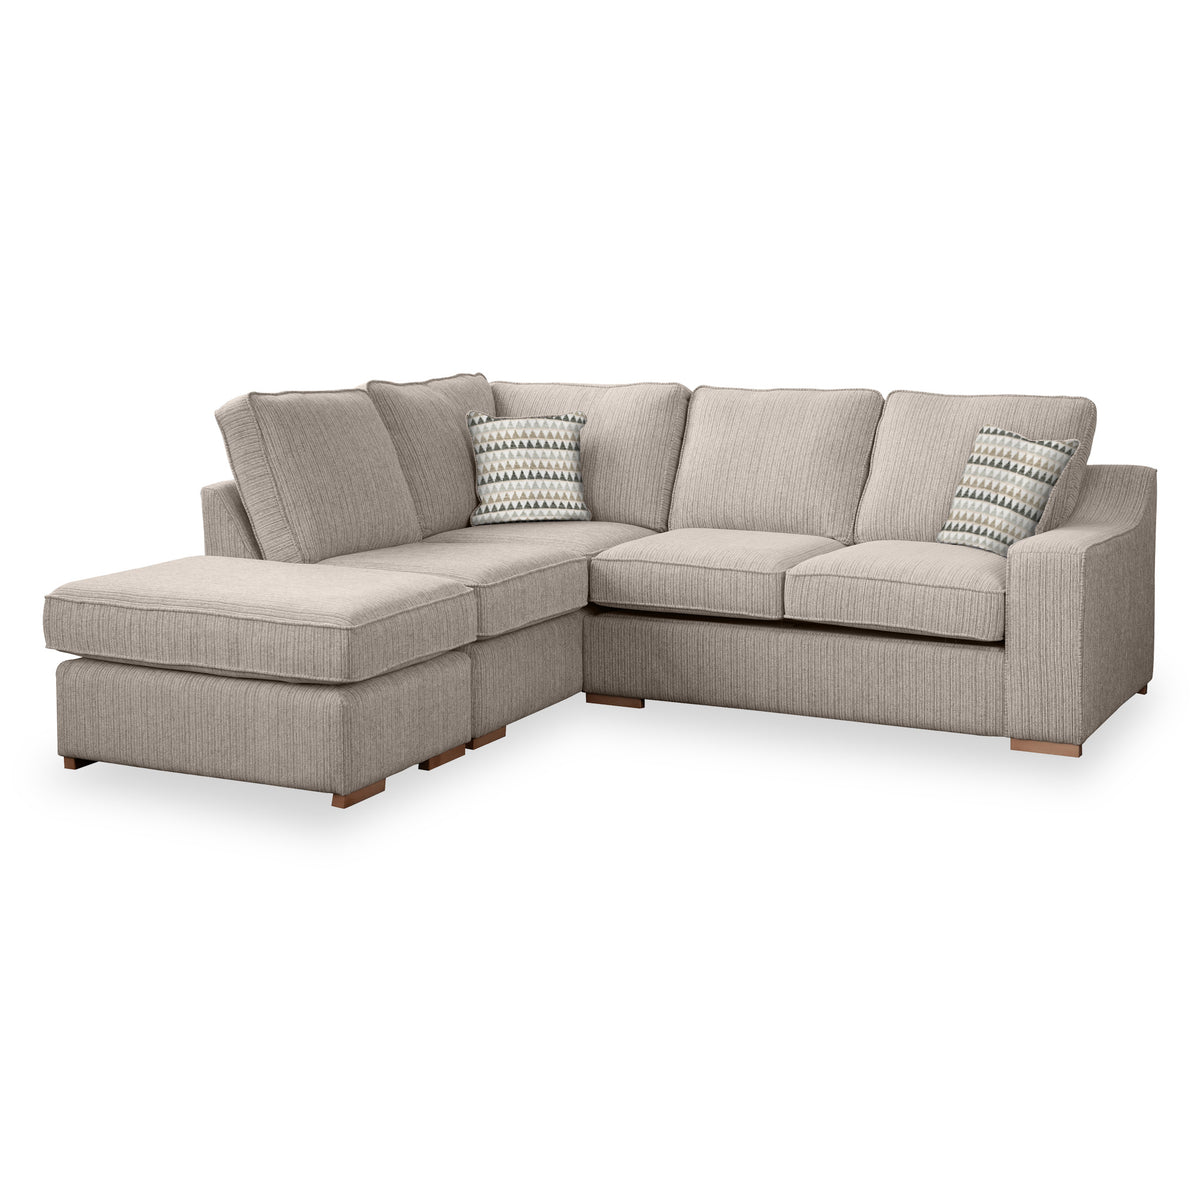 Ashow Beige Left Hand Corner Sofabed with Maika Beige Scatter Cushions from Roseland furniture